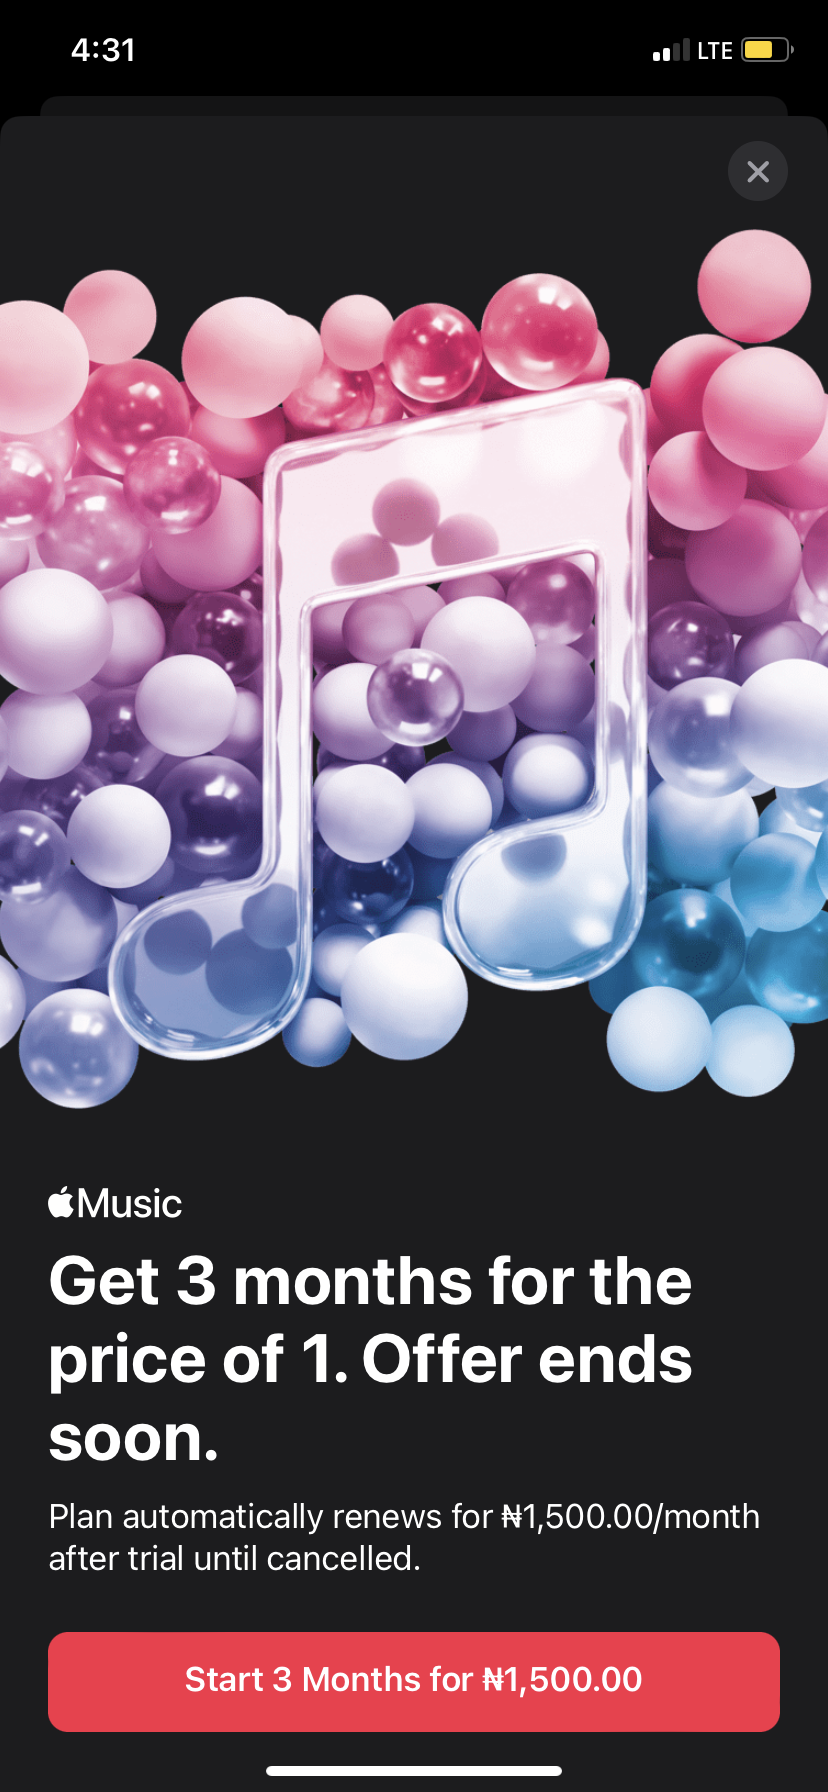 An image of the Apple Music App.